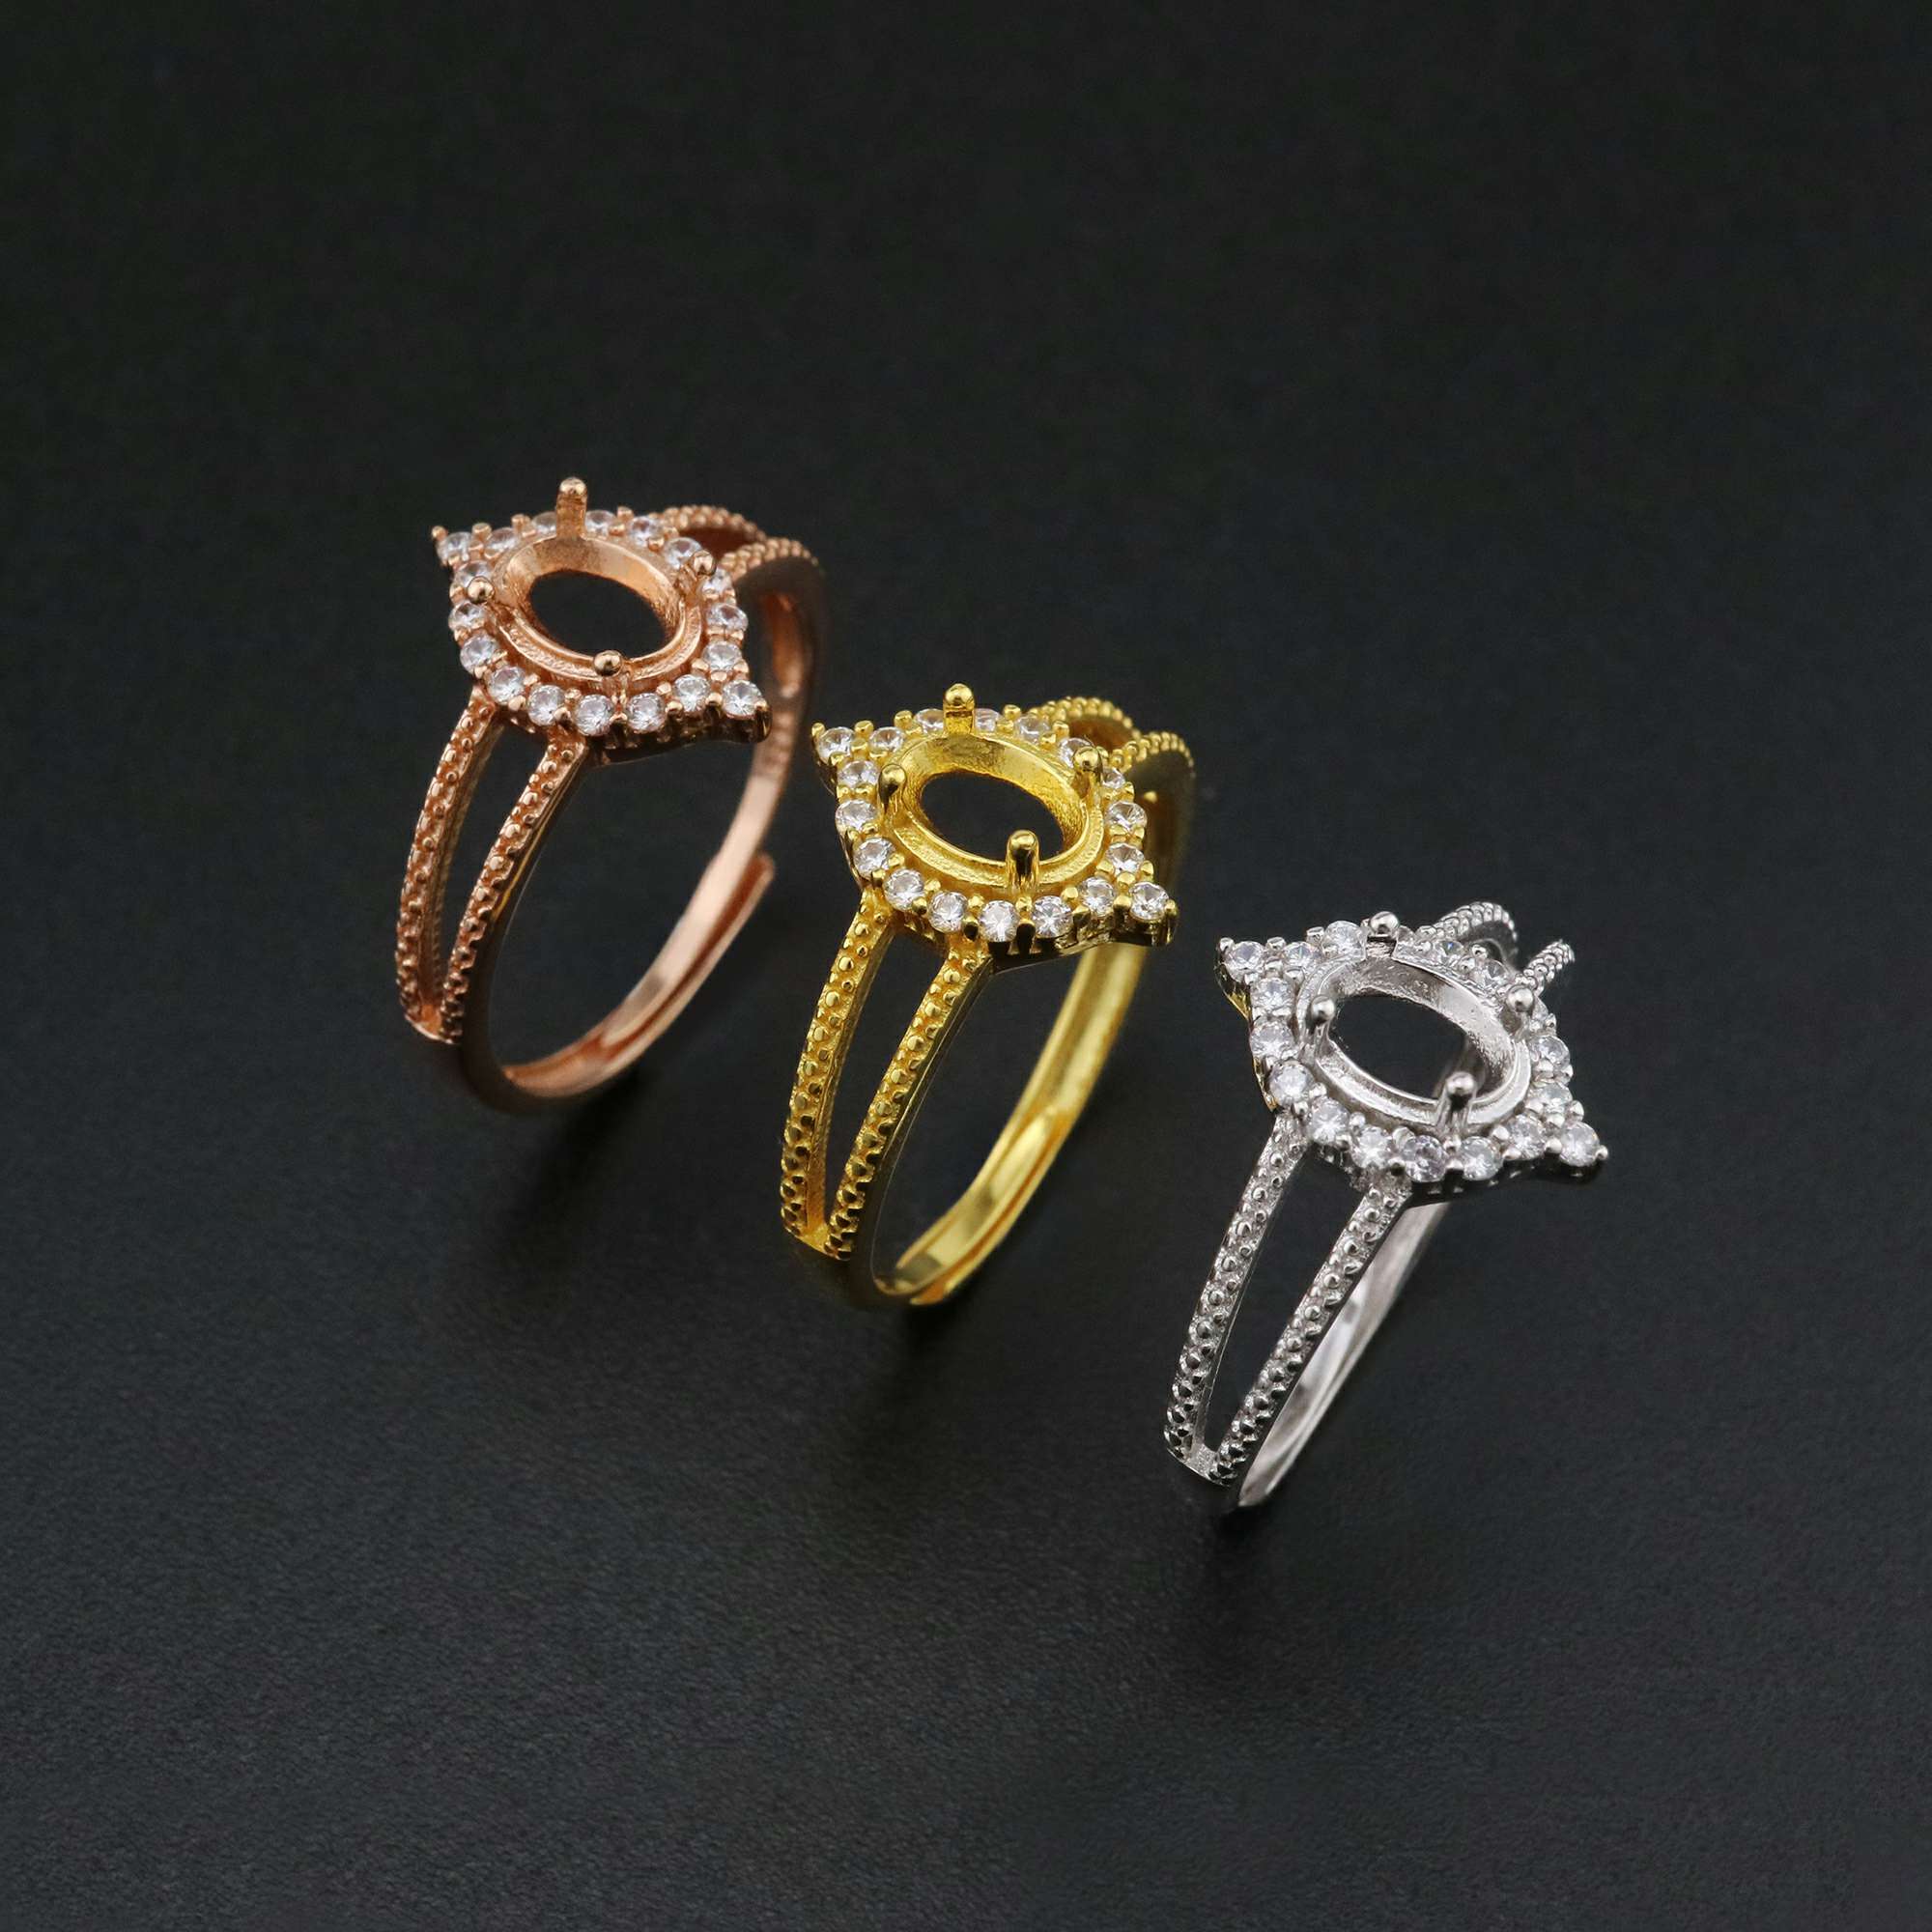 1Pcs 4x6MM Oval Prong Ring Settings Adjustable Vinatge Style Gold Plated Solid 925 Sterling Silver Bezel Tray for Gemstone 1224048 - Click Image to Close